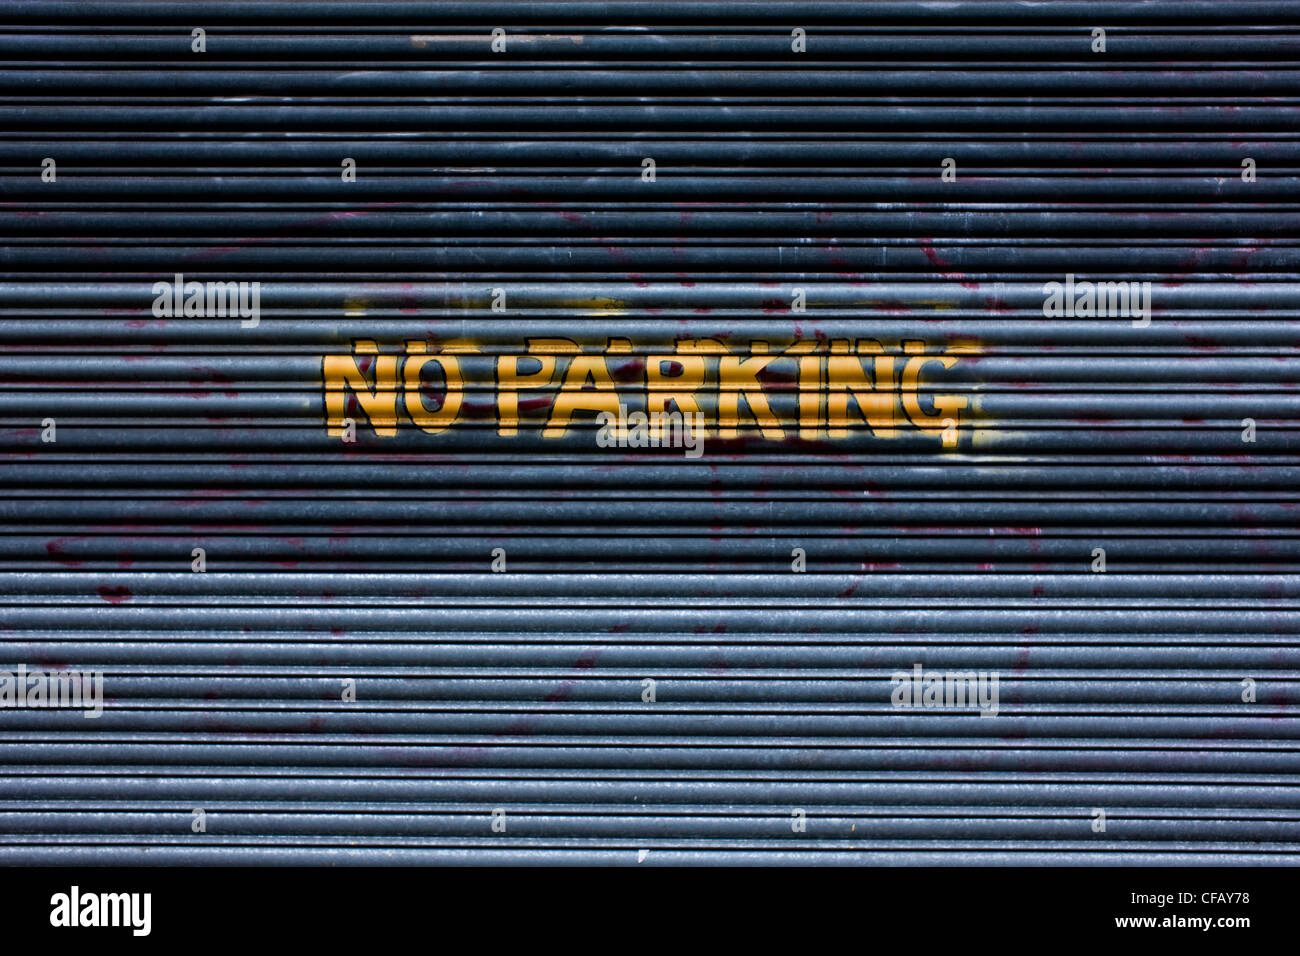 NO PARKING sign on garage fence, London. Stock Photo